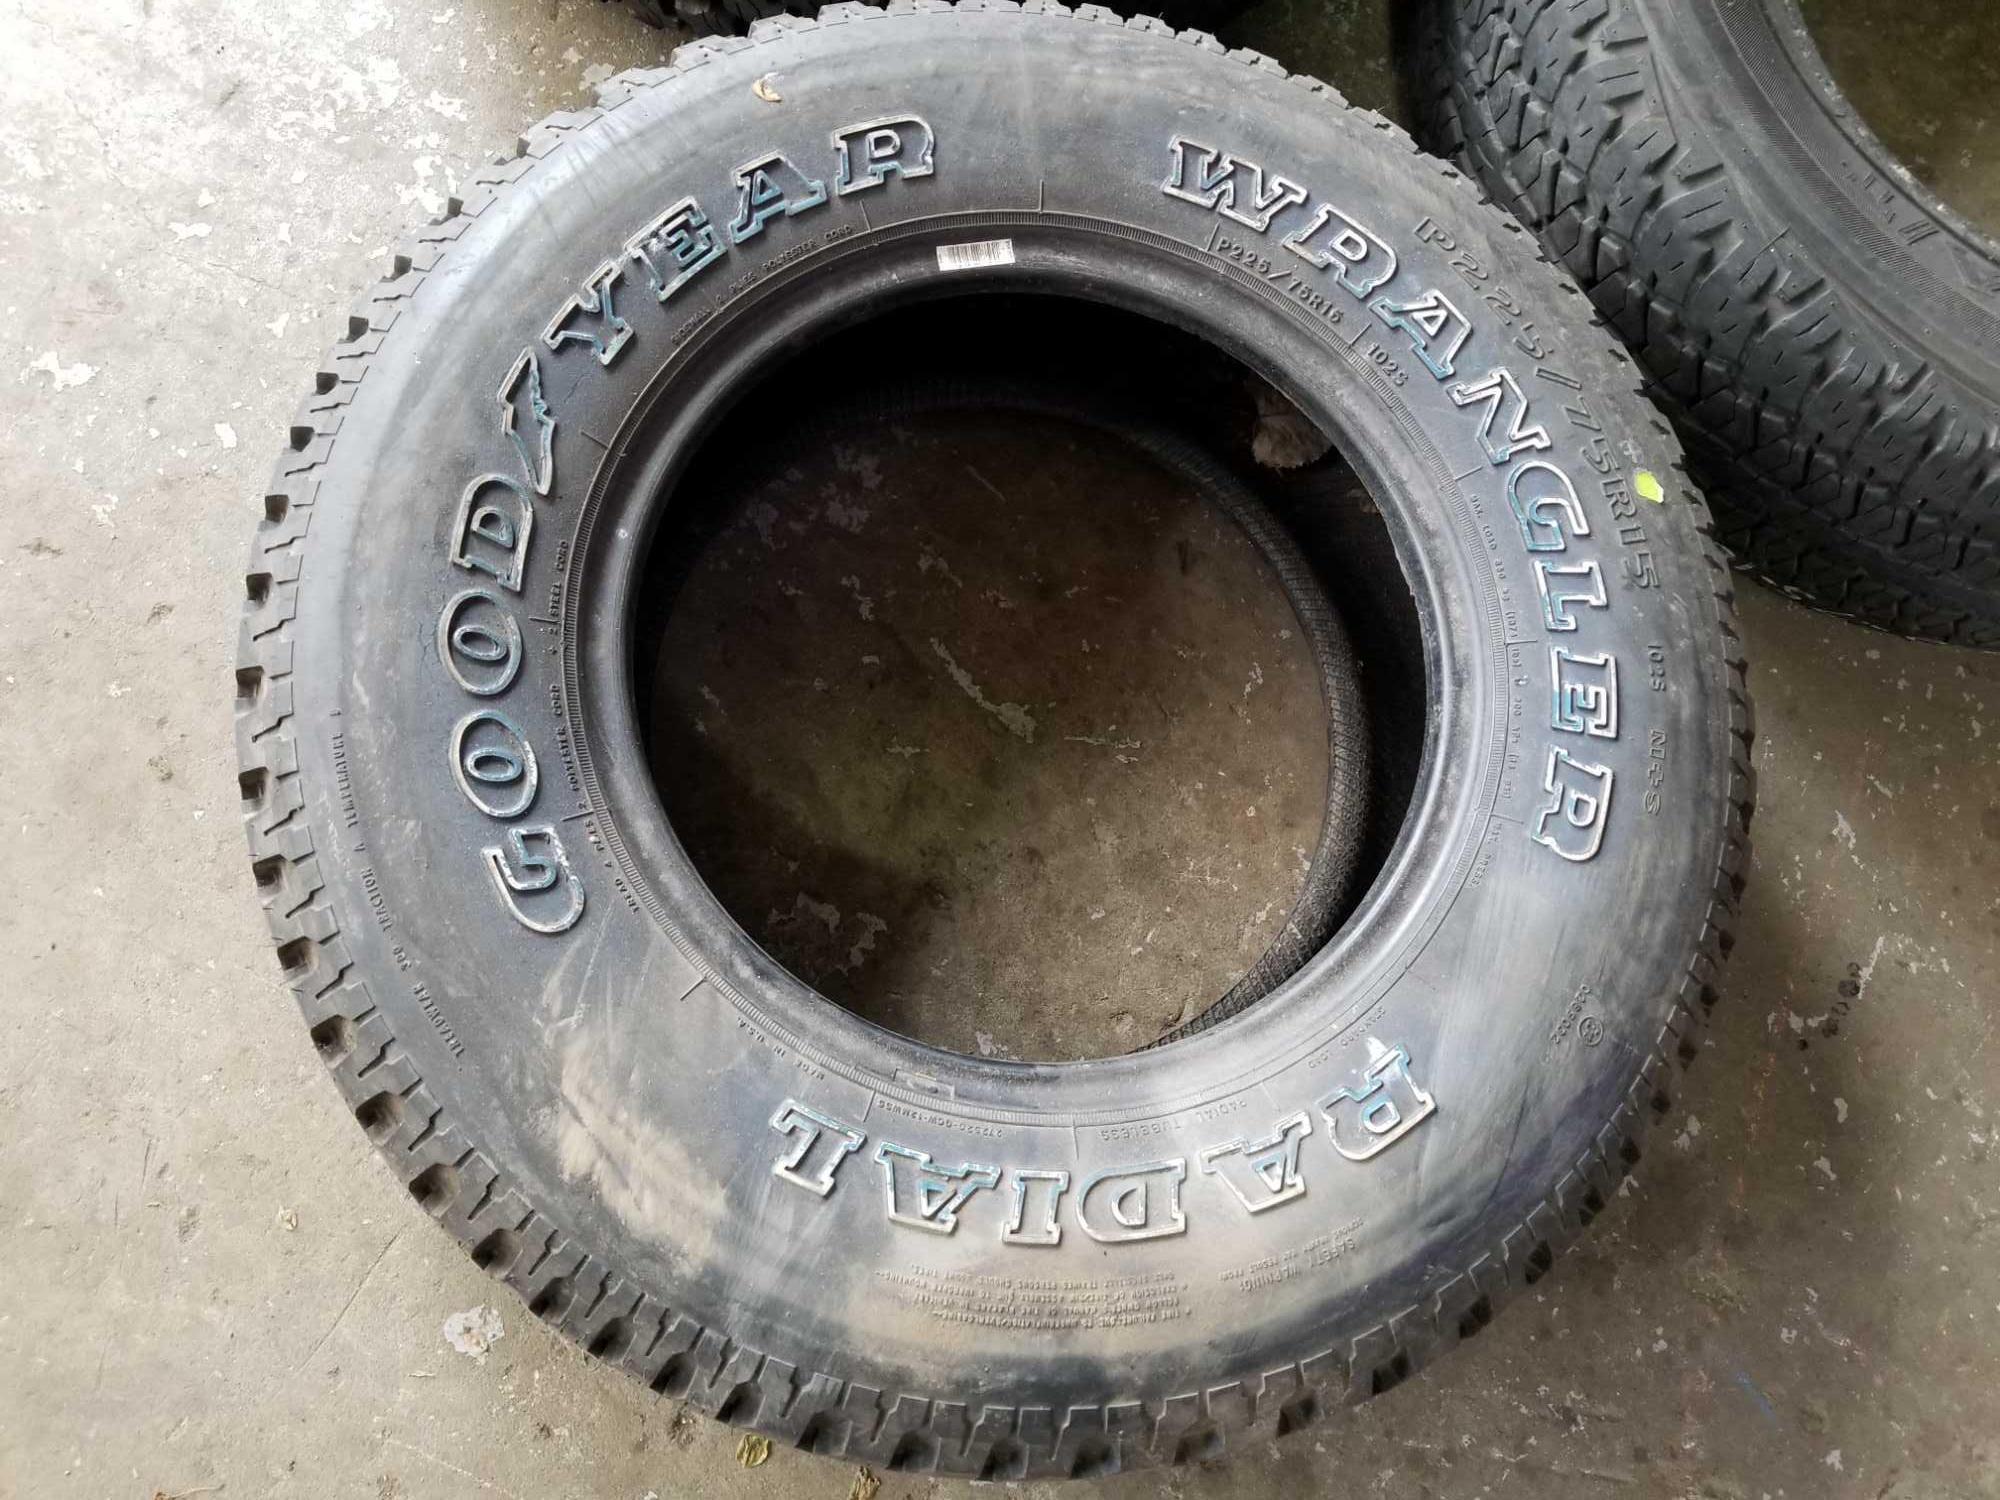 Qty (3) tires. Goodyear Wrangler Radial P225/... | HONDA MOTORCYCLE,  GO-KART, OFF-ROAD DIRTBIKE, POWER WHEELCHAIRS and RAMPS, MORGAN SILVER  DOLLAR, AUDIO and MUSIC, COLLECTIBLES, TANNING BED, BIKES, POWER TOOLS and  EQUIPMENT, HOME